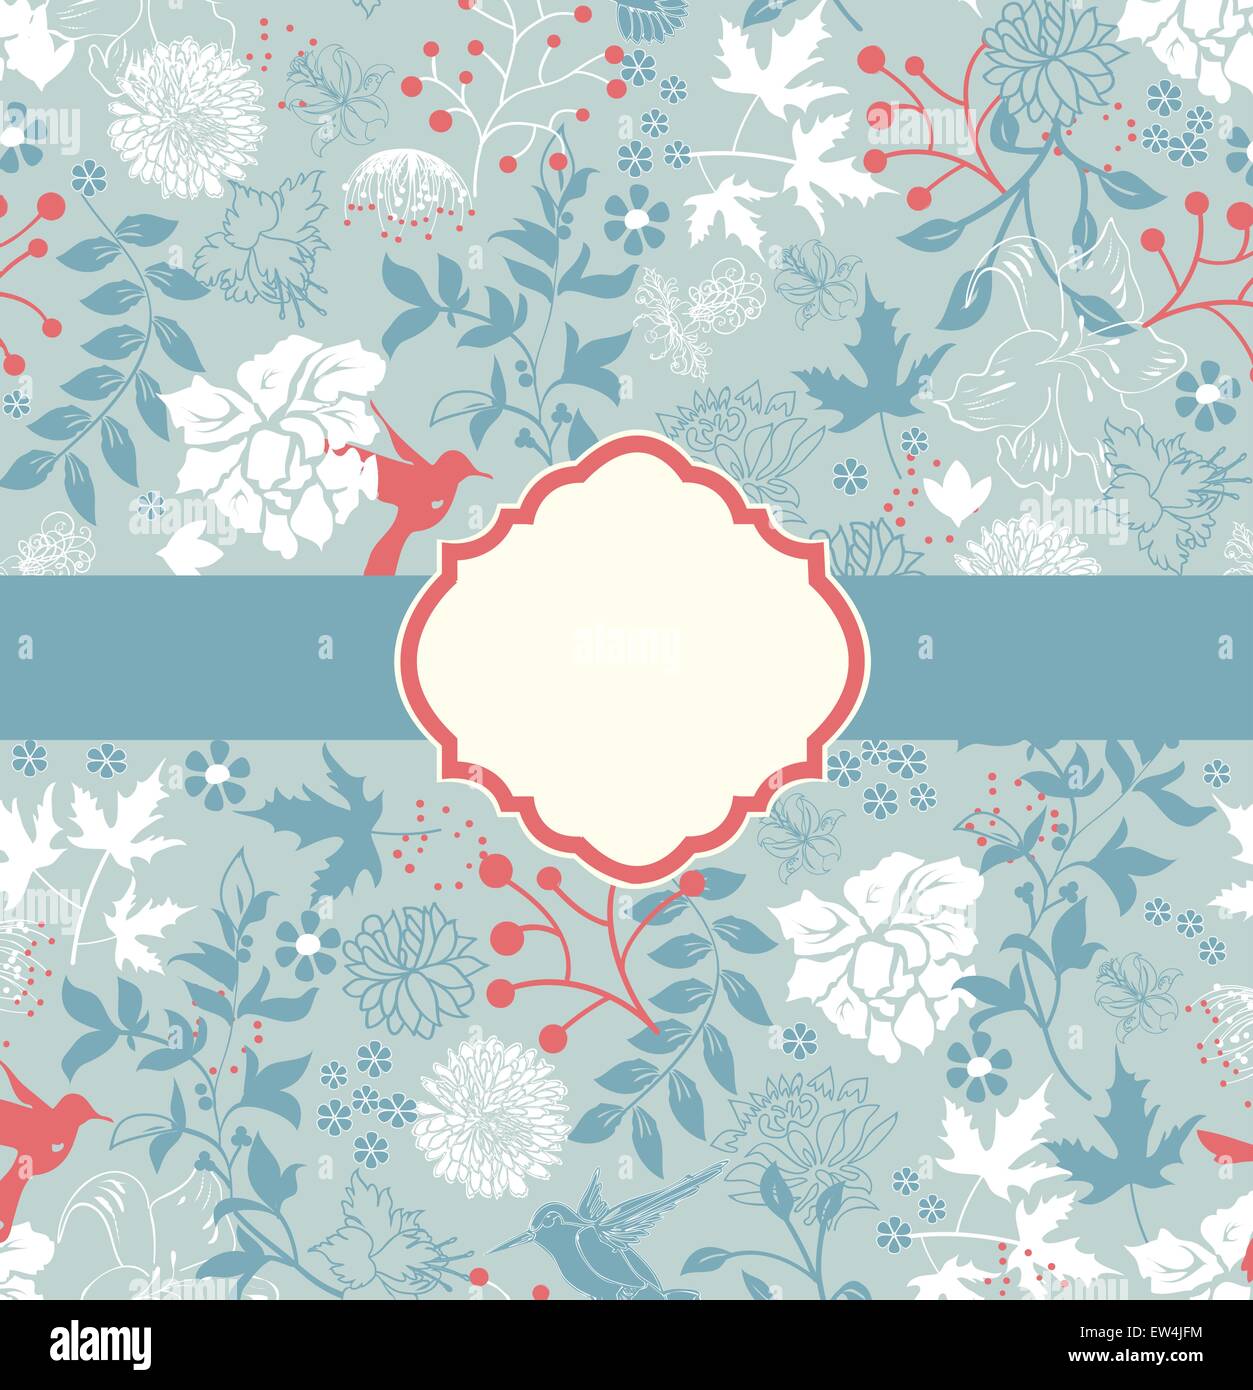 Rectangular Regularly Shaped Light Blue Watercolour Background Beautiful Abstract Canvas For Congratulations Valentines Designs Invitation Cards Engagements Postcards Text And Etc Buy This Stock Illustration And Explore Similar Illustrations